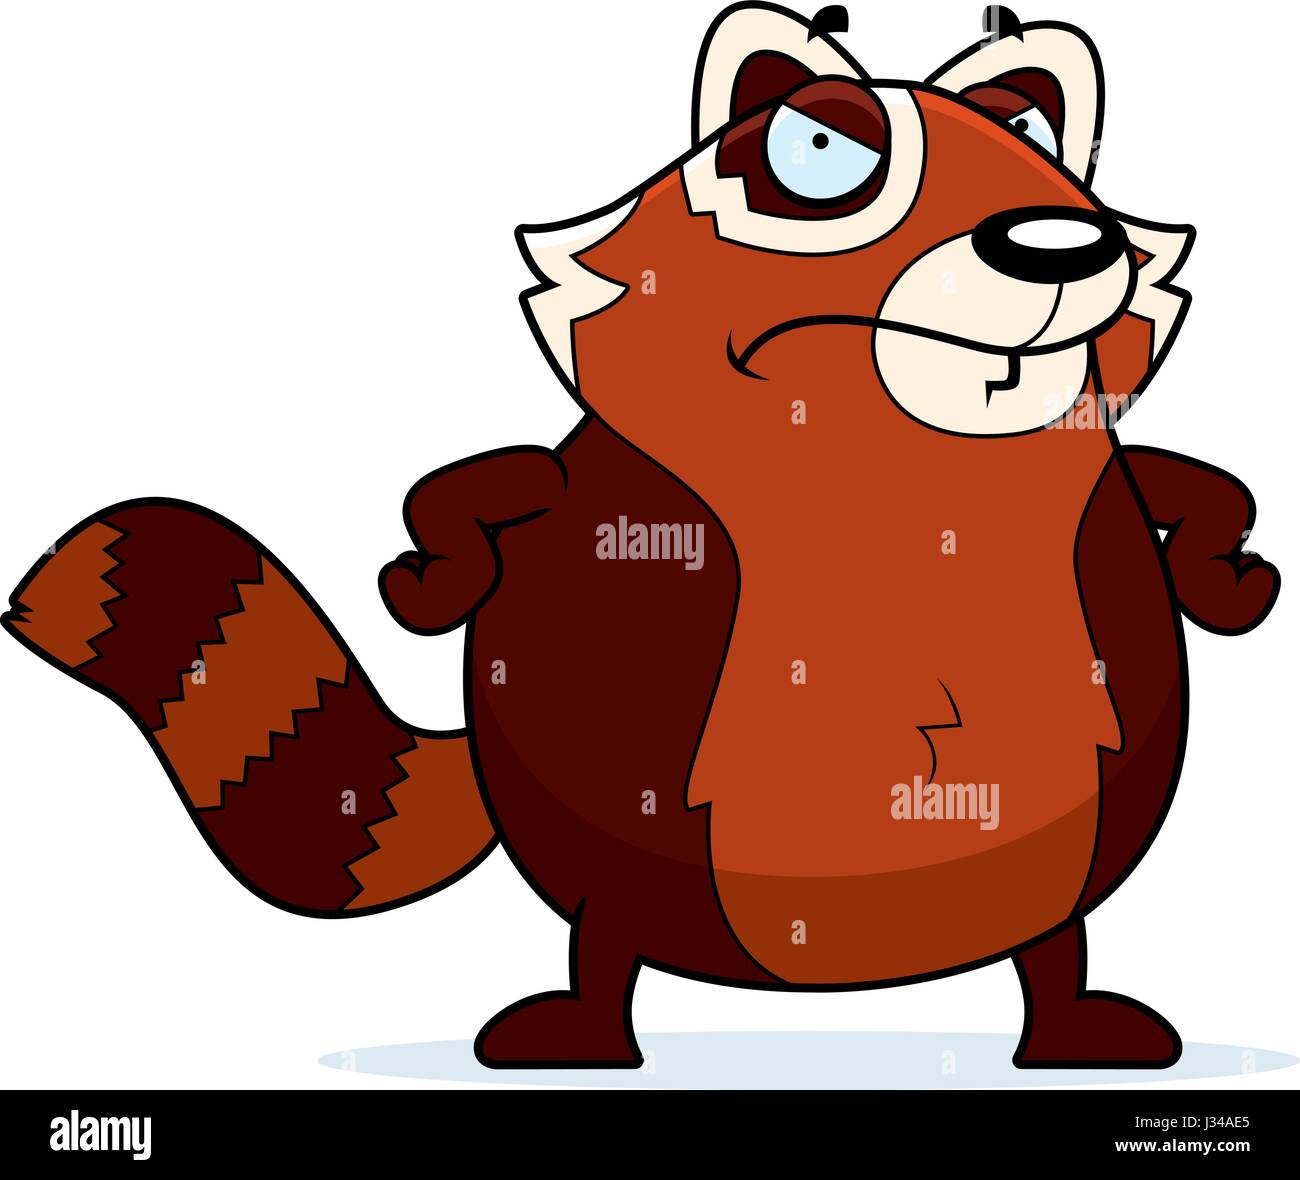 A cartoon illustration of a red panda with an angry expression. Stock Vector